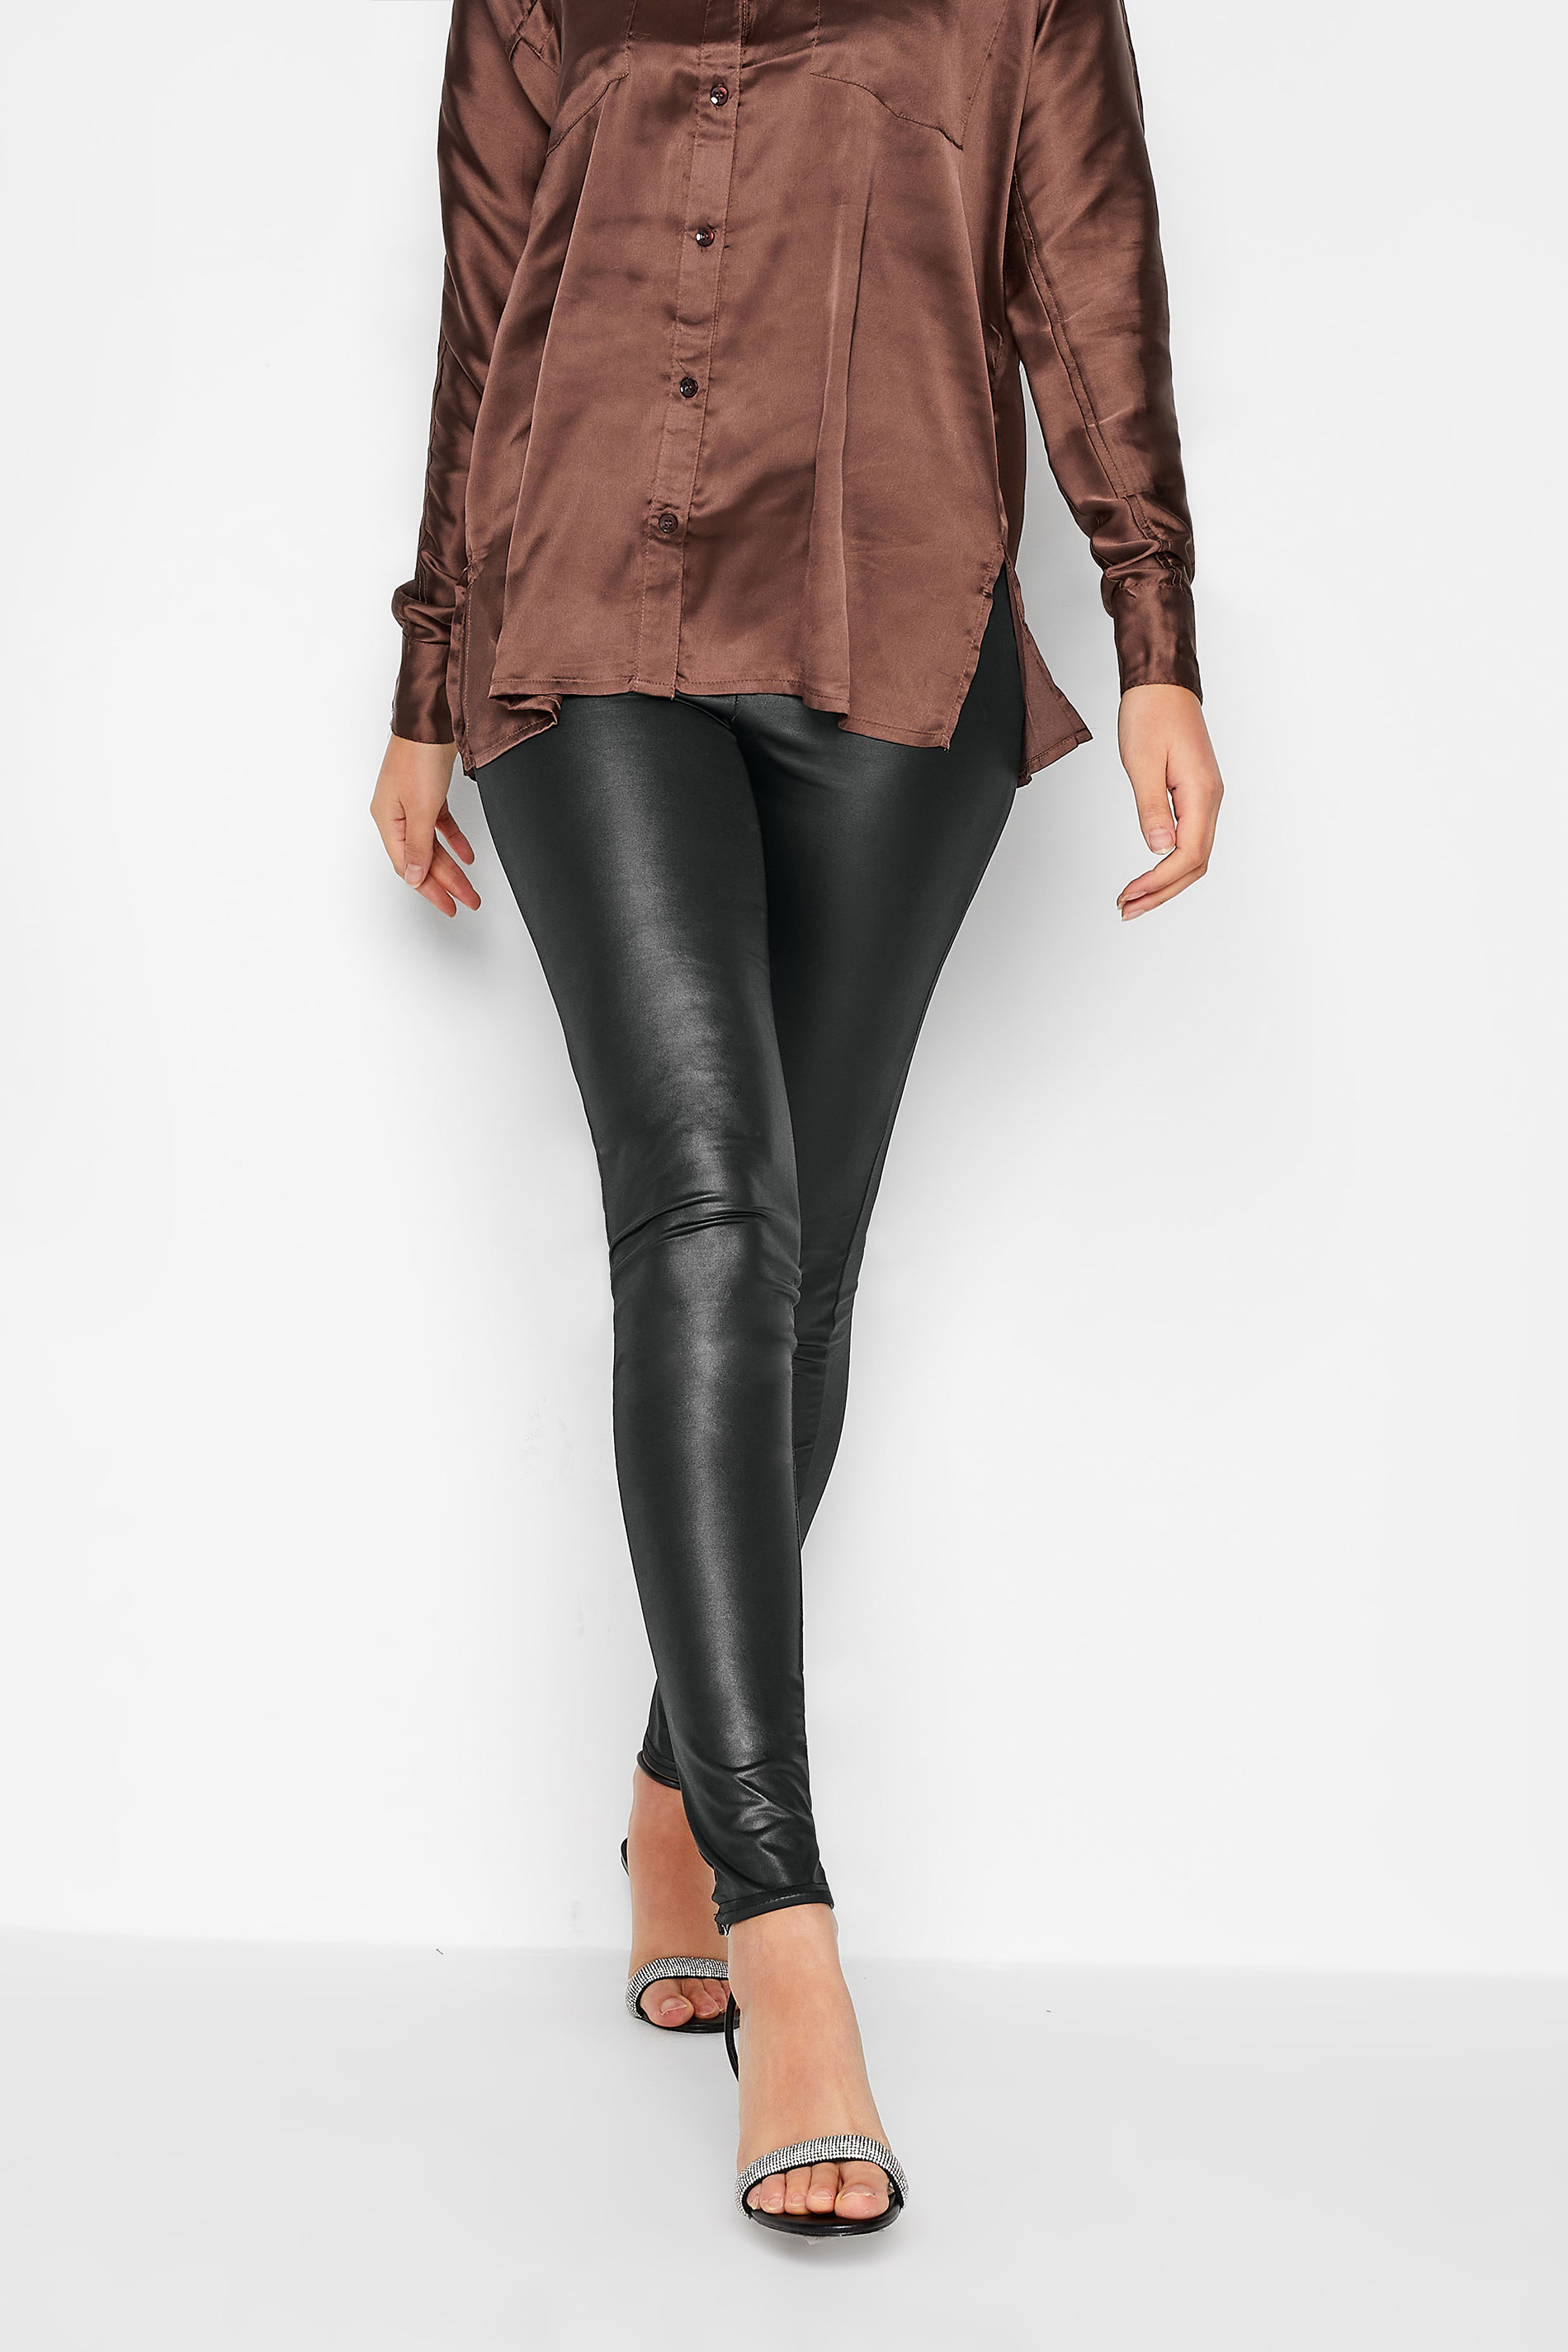 Tall Women's LTS Black Faux Leather Look Leggings | Long Tall Sally 1